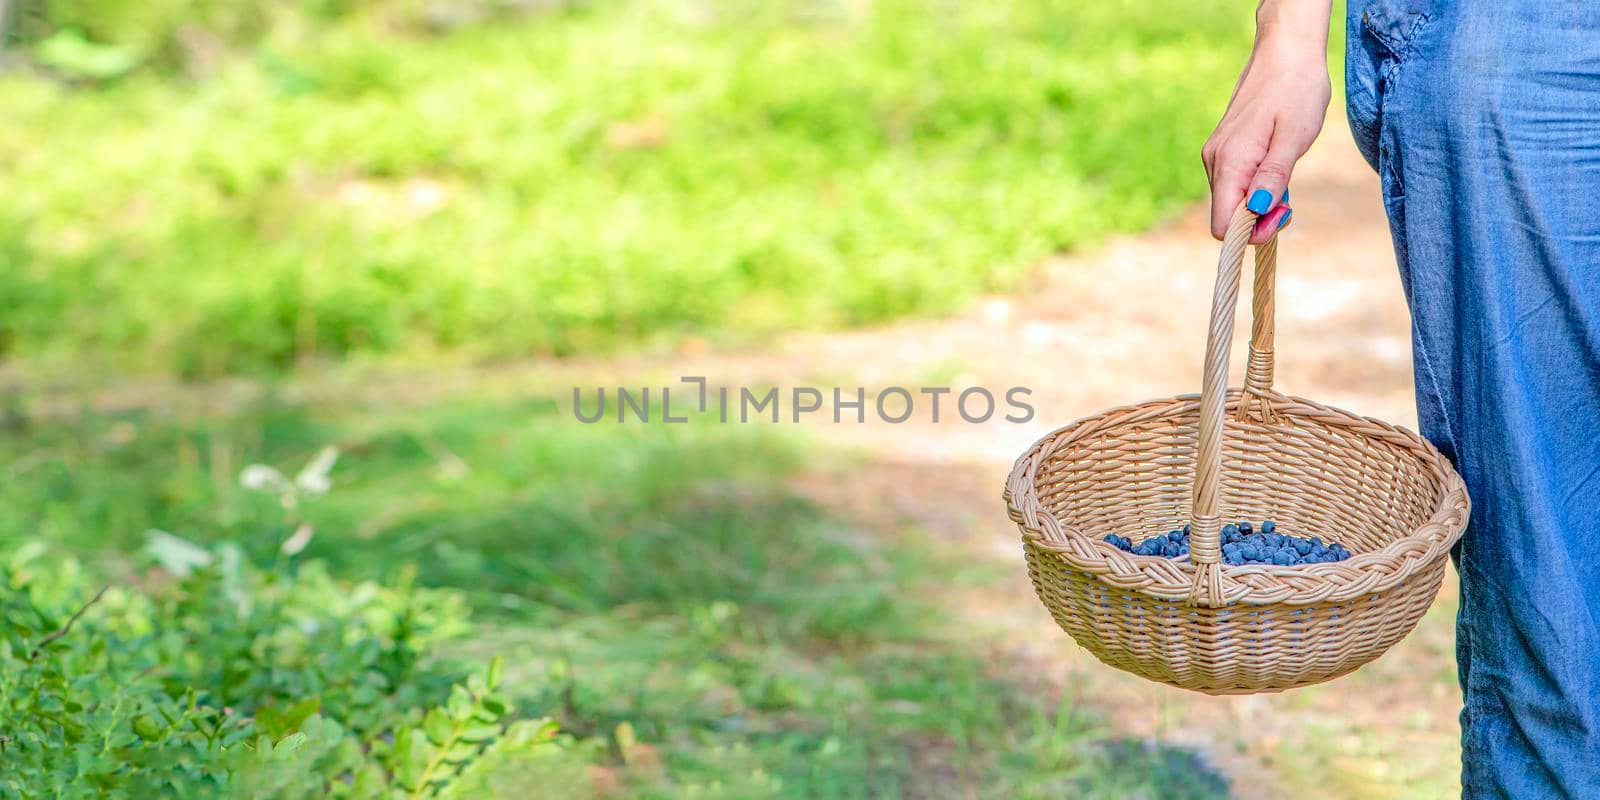 Berry season. Collect blueberries in the forest. A woman walks through the forest with a basket containing blueberries. The process of finding and collecting blueberries.